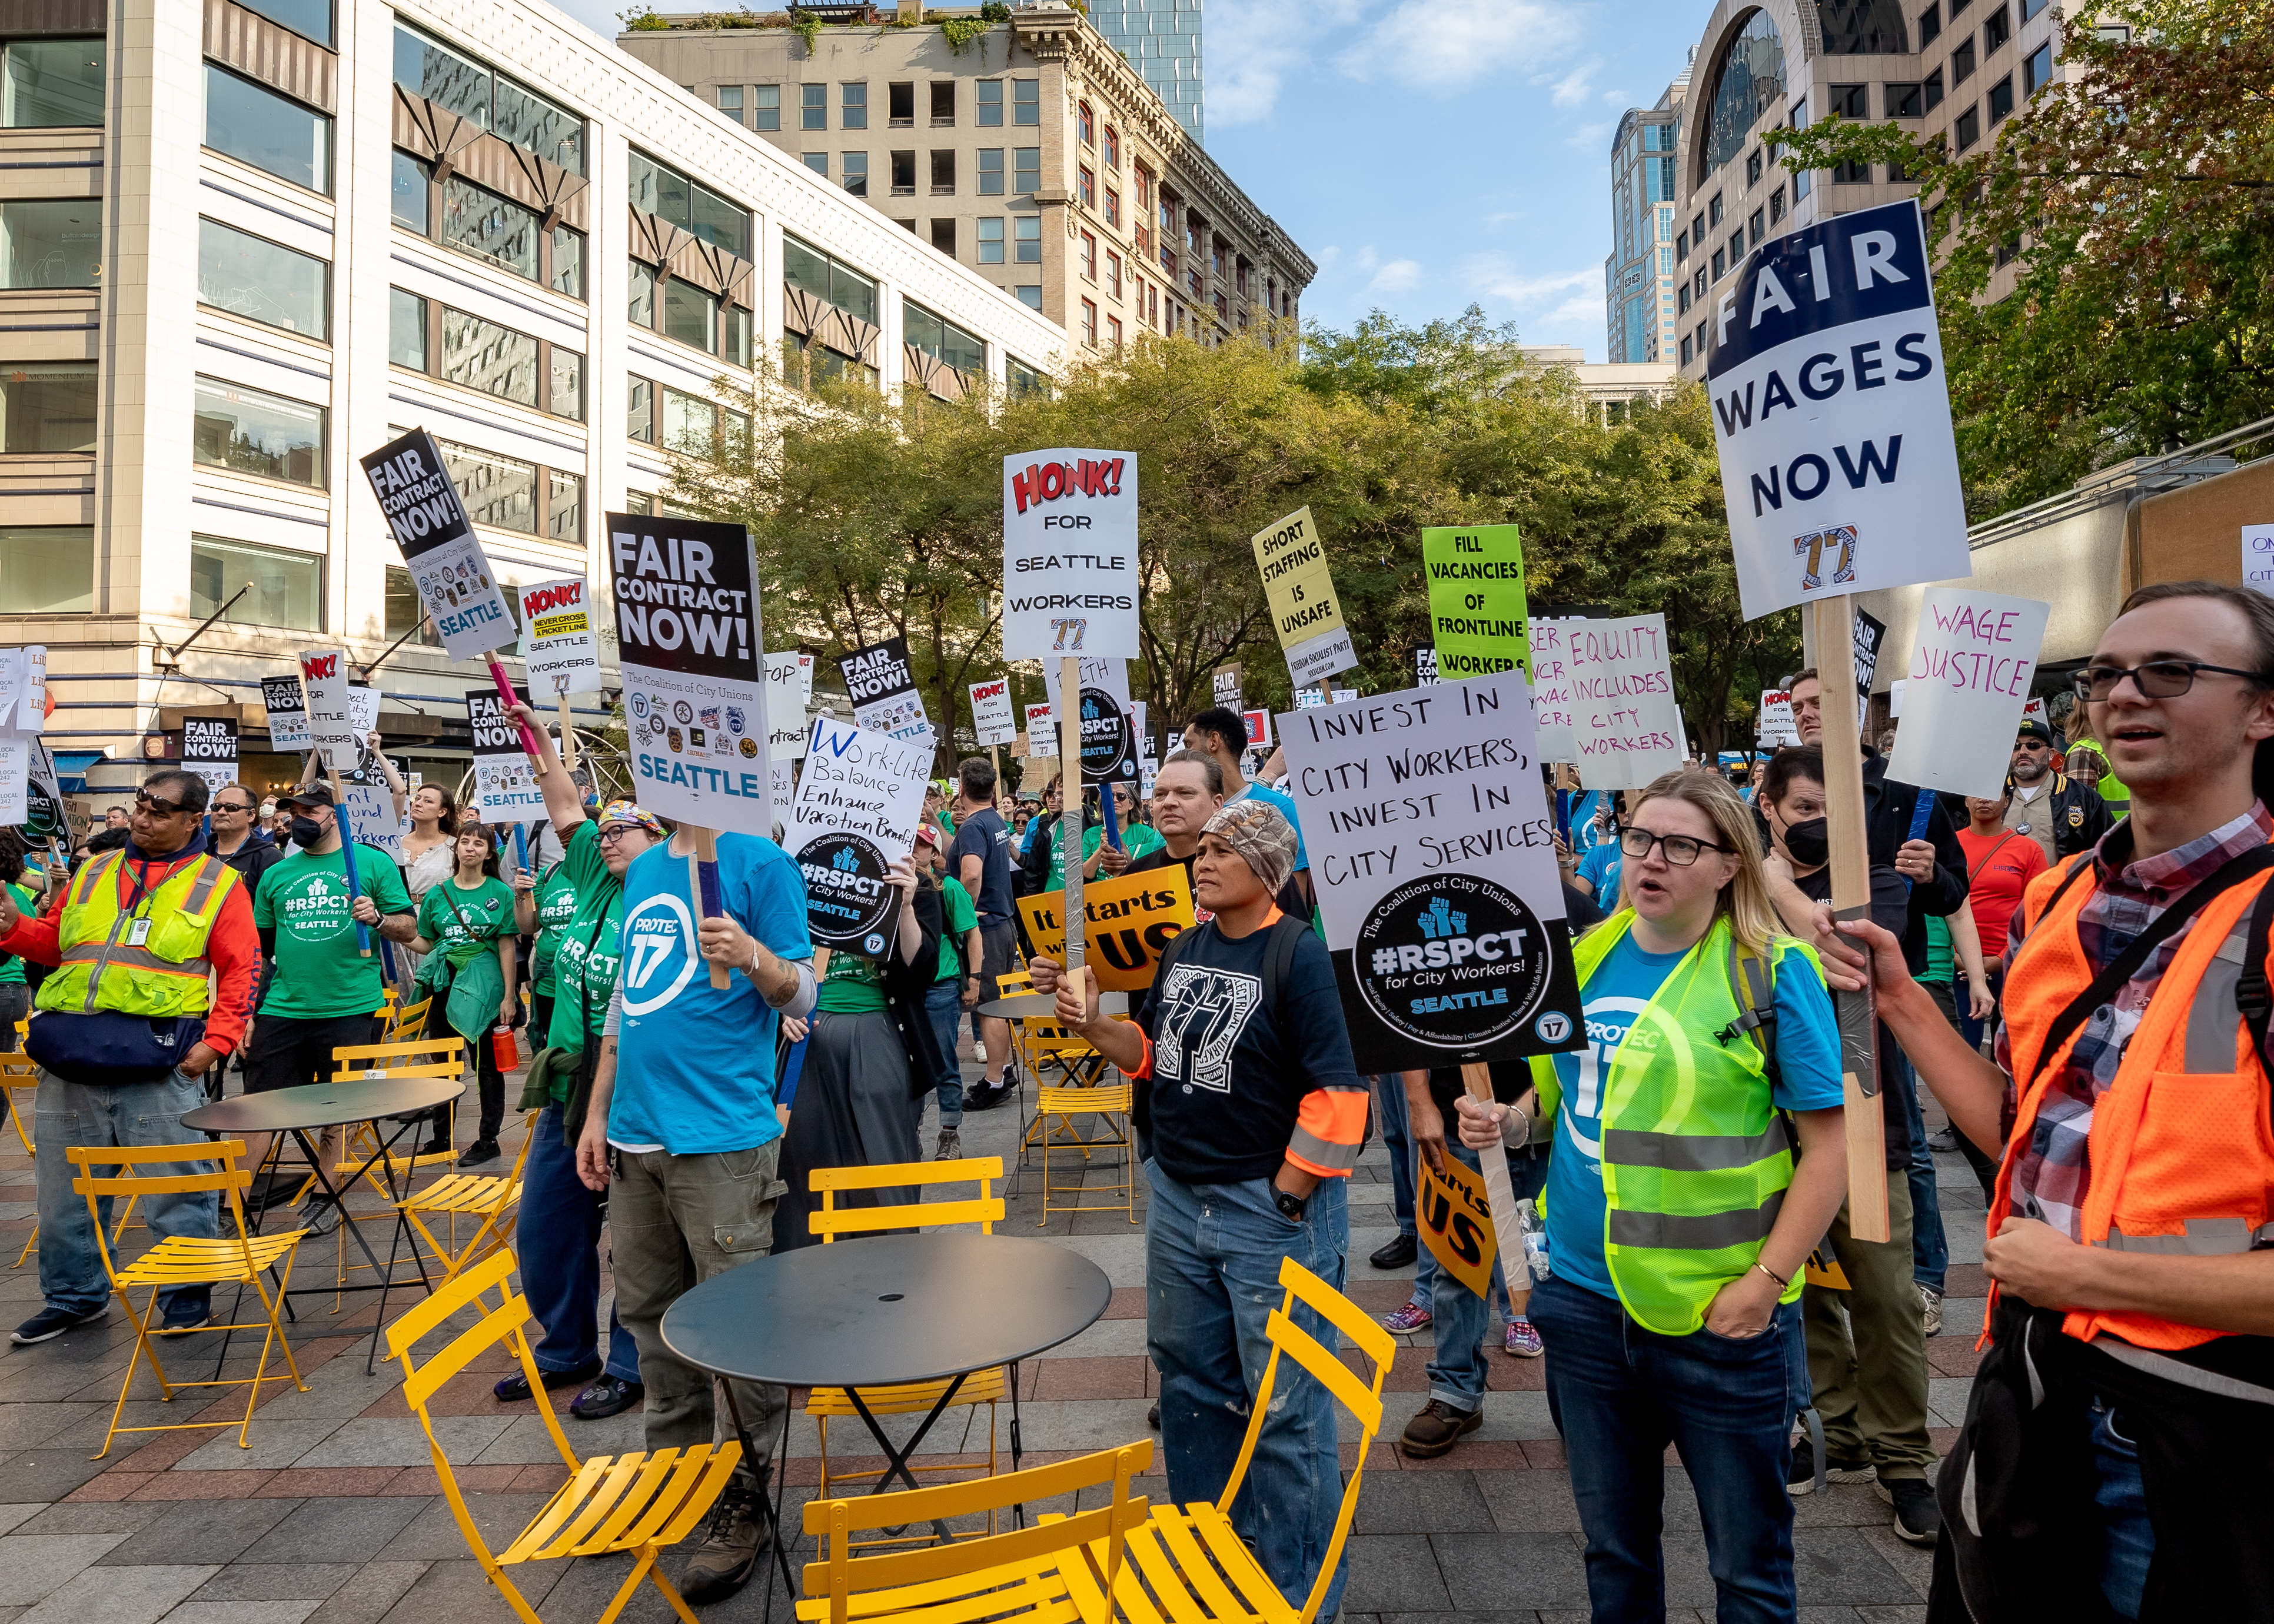 A crowd of coalition union members gather at the end of their march at Westlake Center in downtown Seattle. Folks are pictured wearing their union gear, safety vests, and holding up their signs to demand a fair contract.